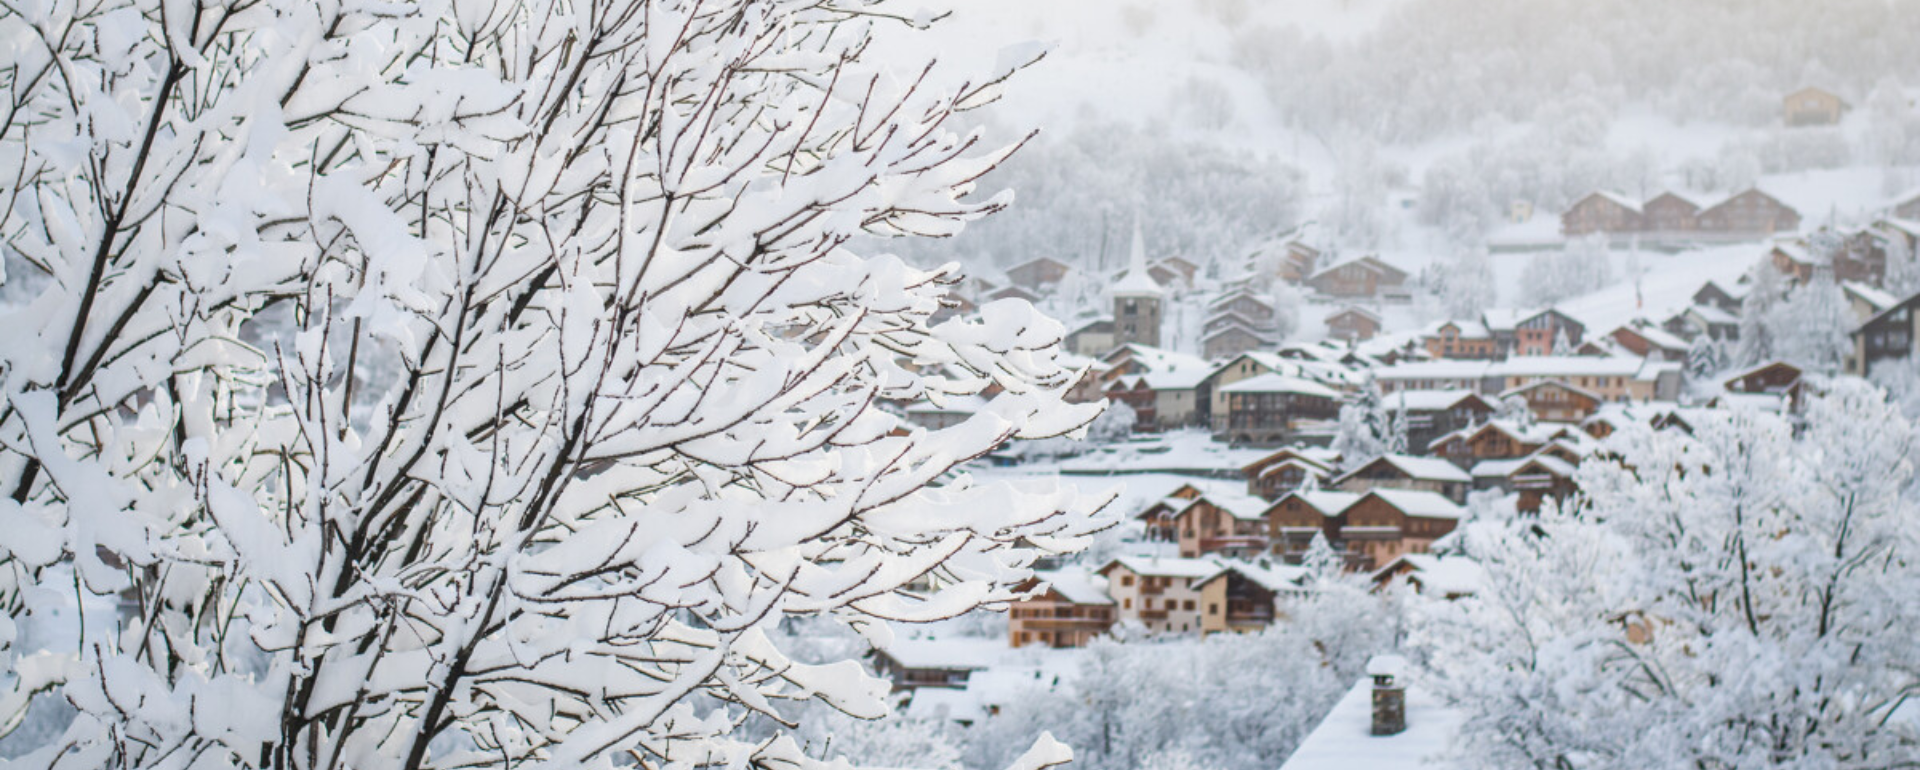 Experience an unforgettable chalet vacation